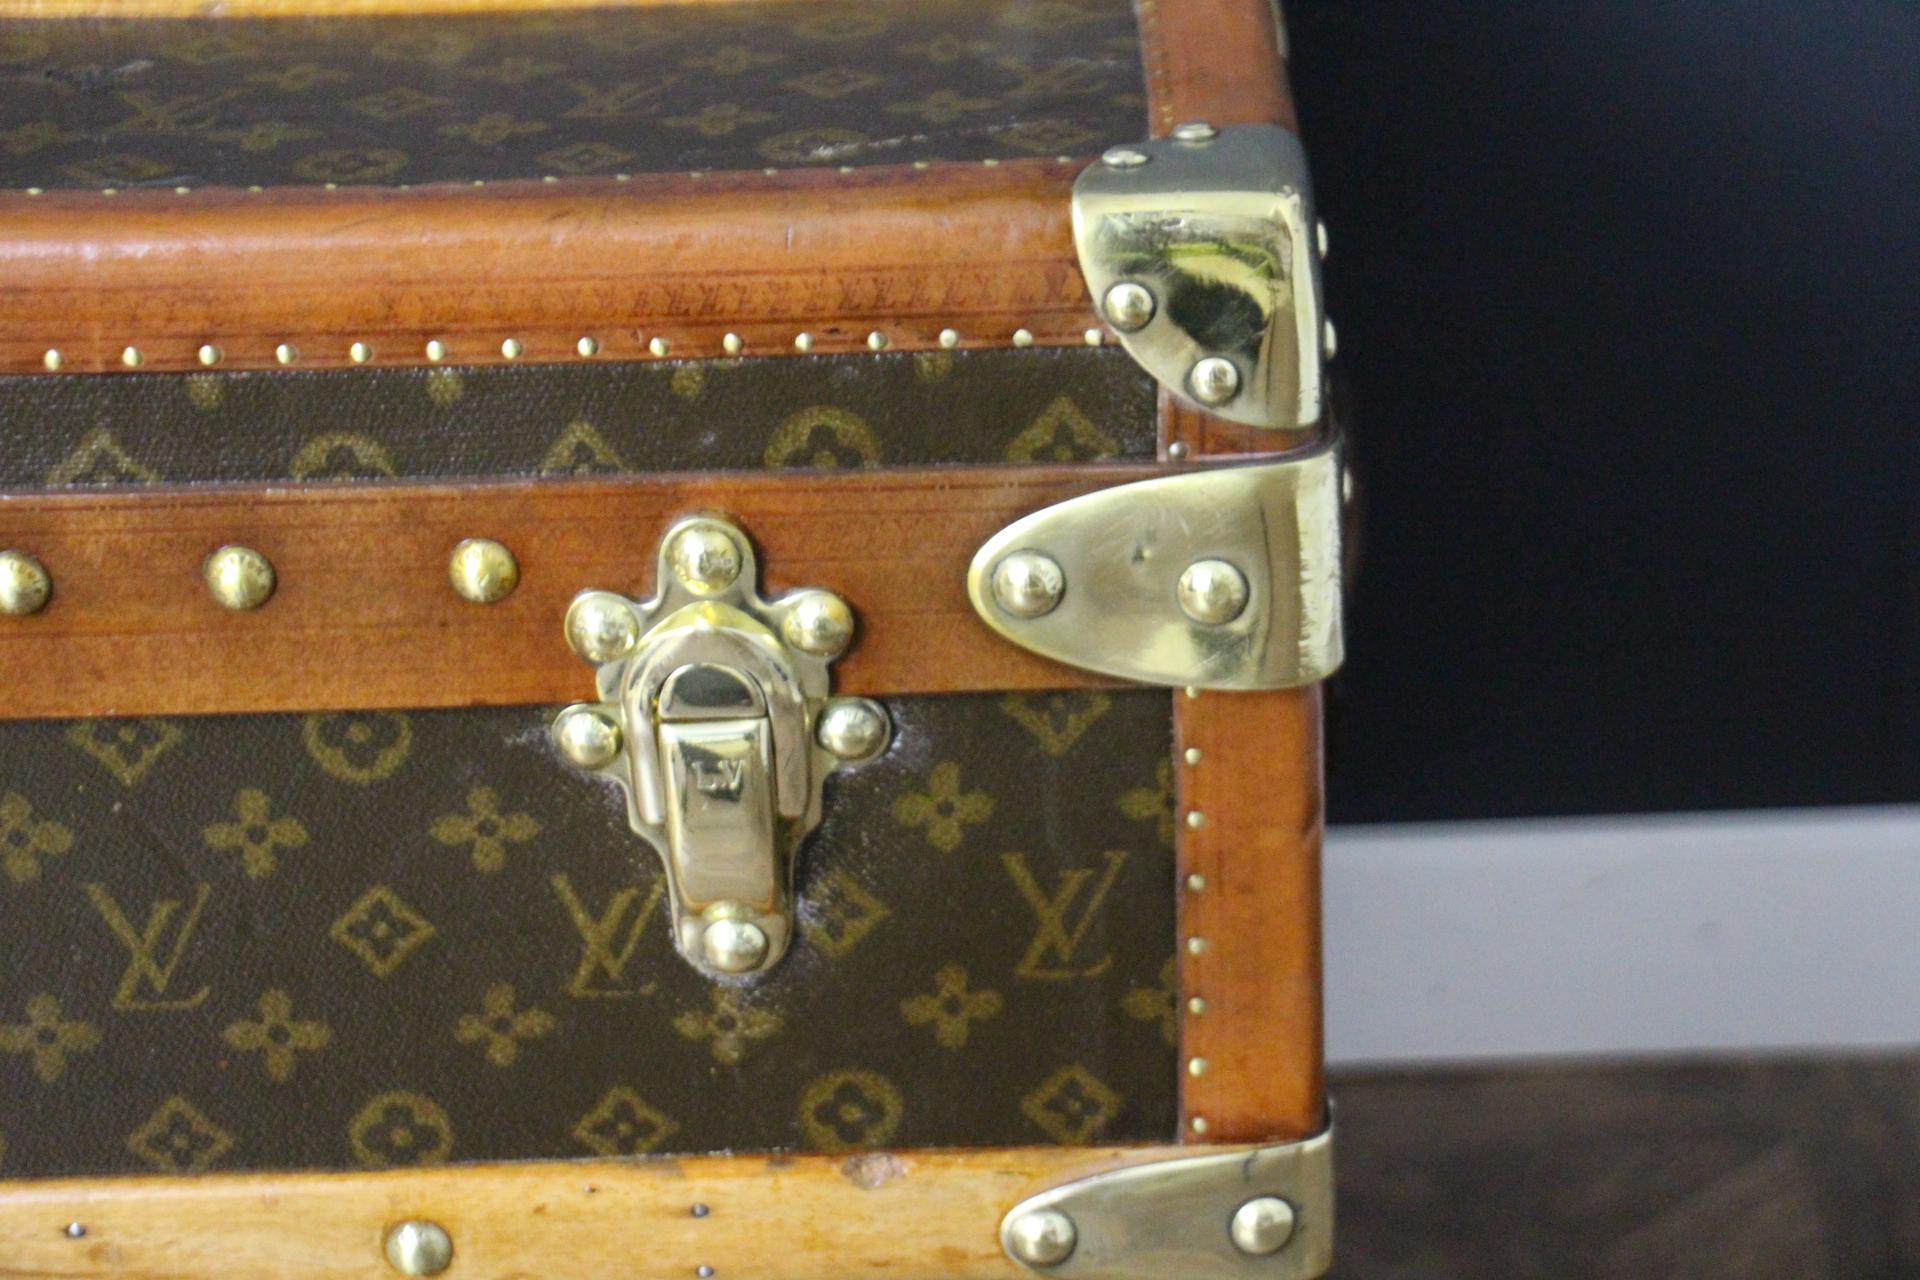 French 1920's Louis Vuitton Steamer Trunk in Stenciled Monogram, 90 cm Vuitton Trunk For Sale